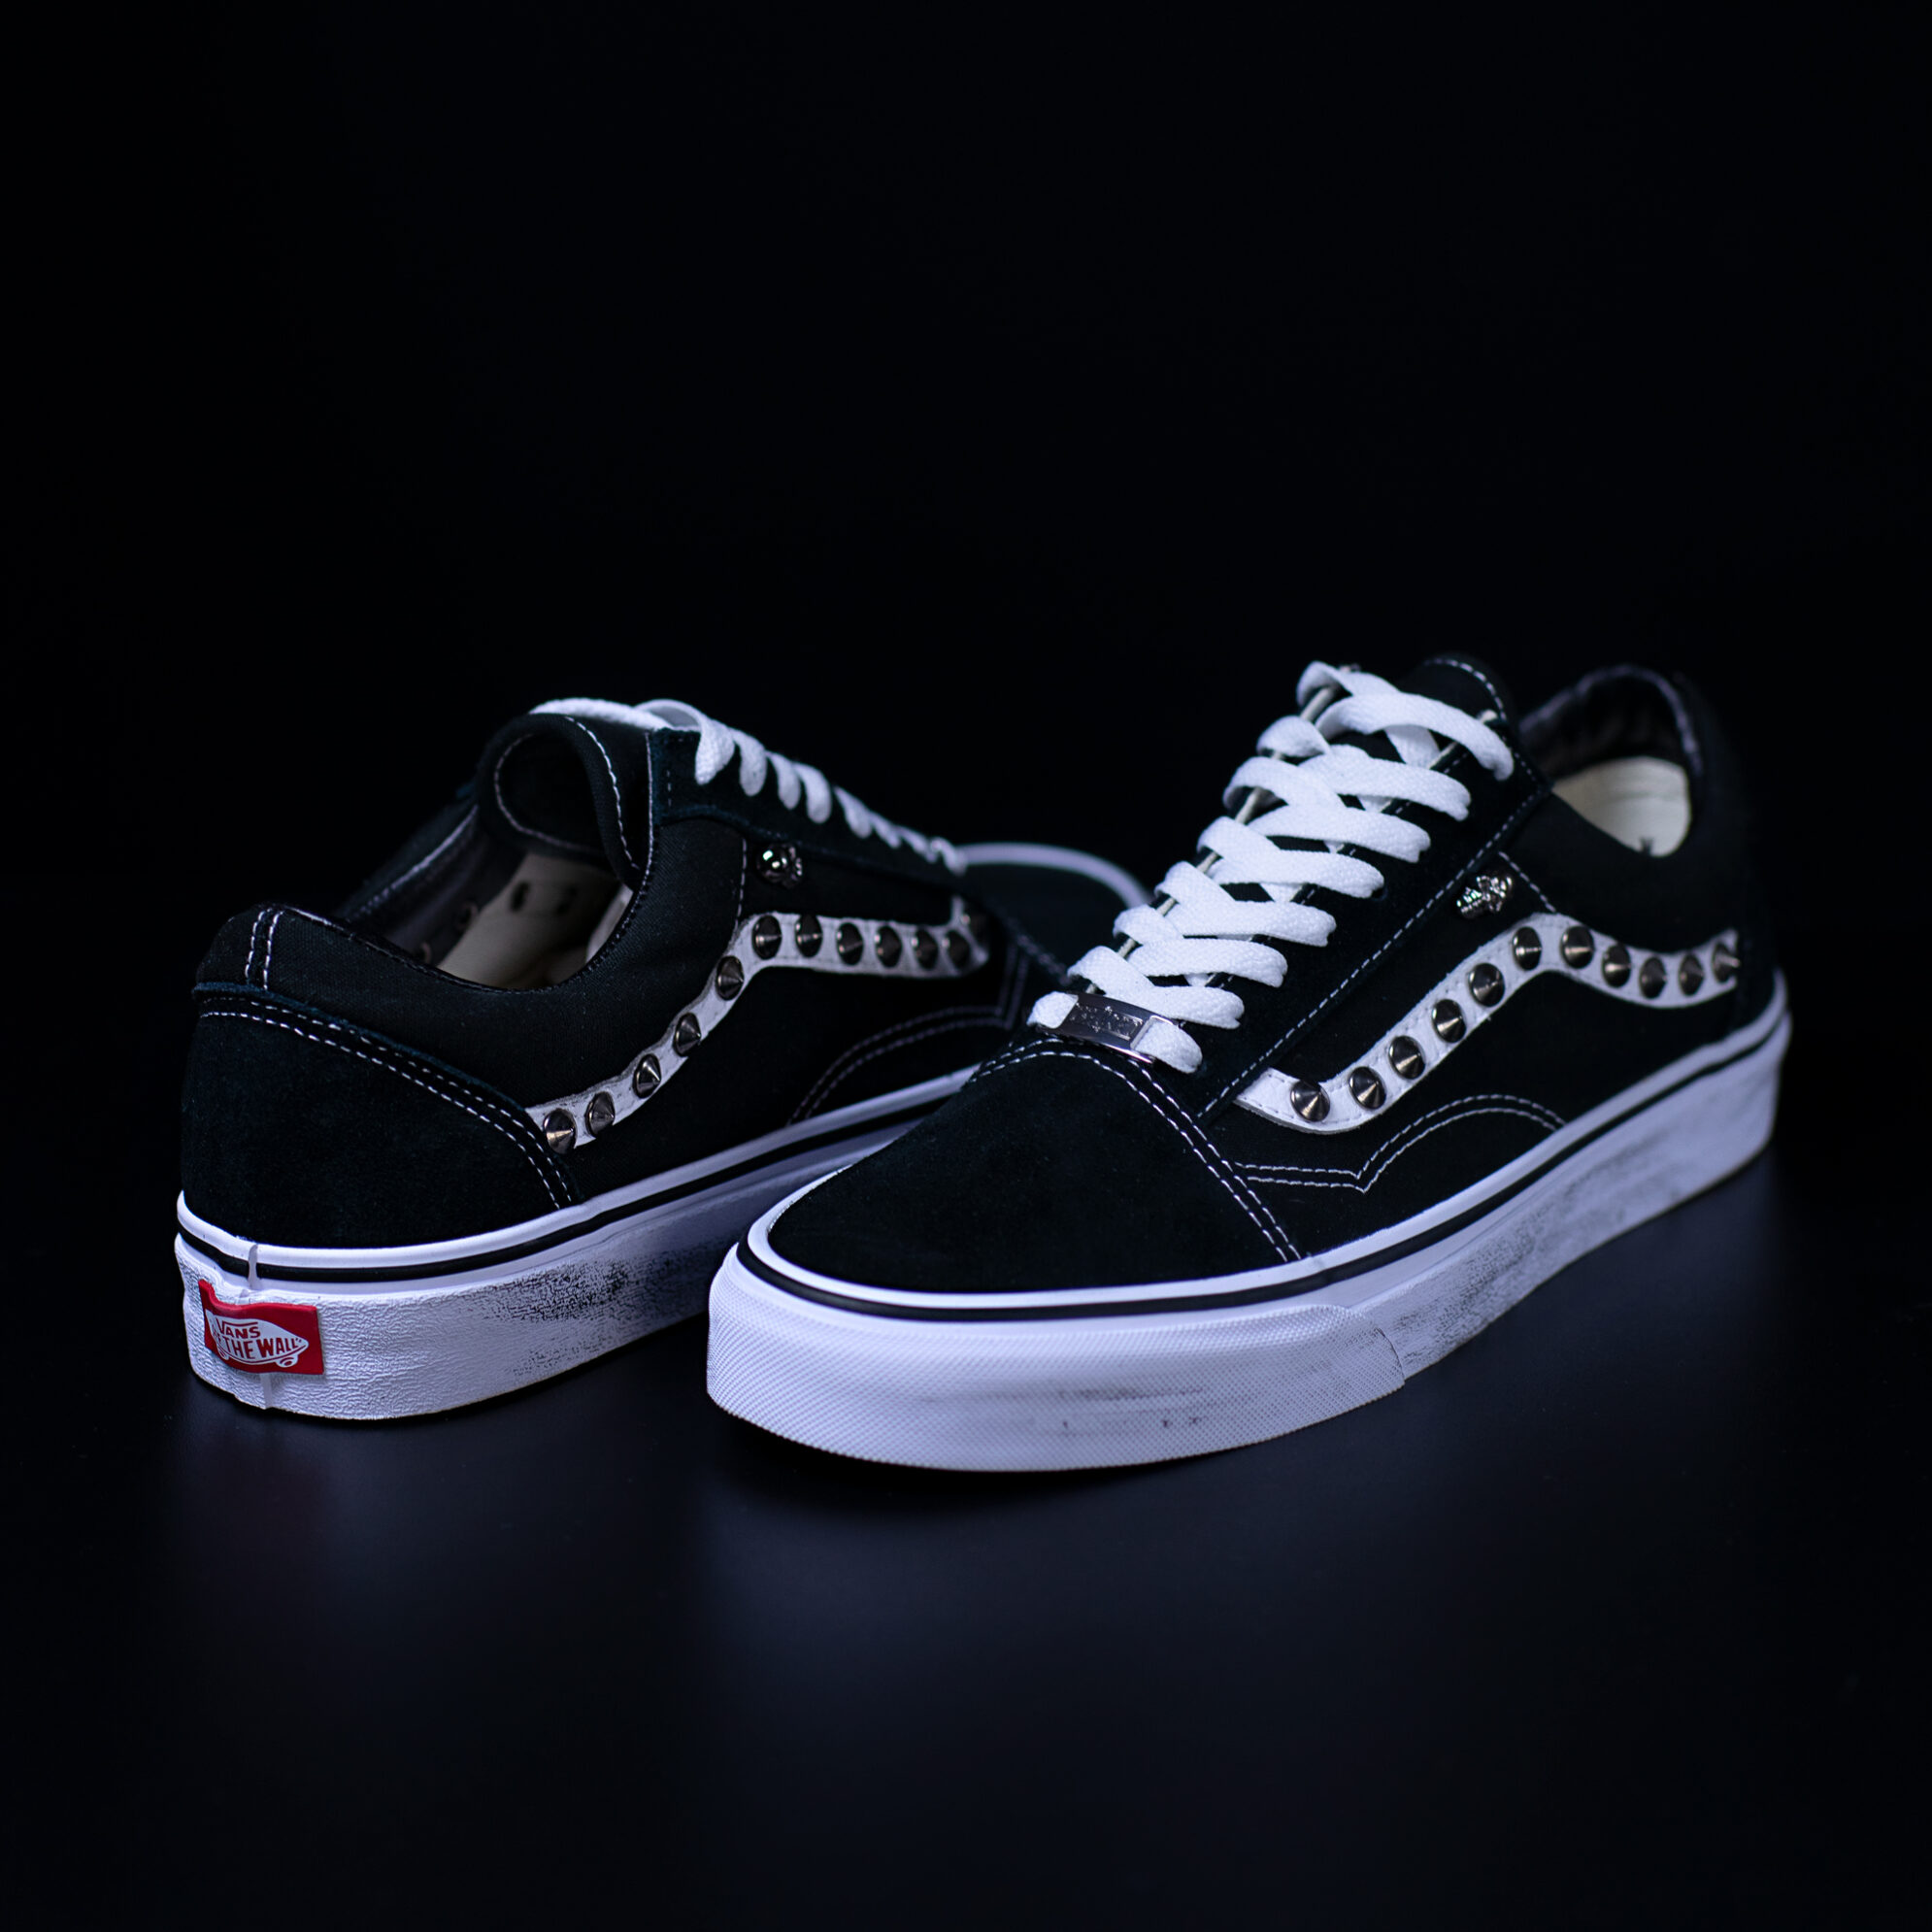 vans don't start now old skool sneakers personalizzate da dressed